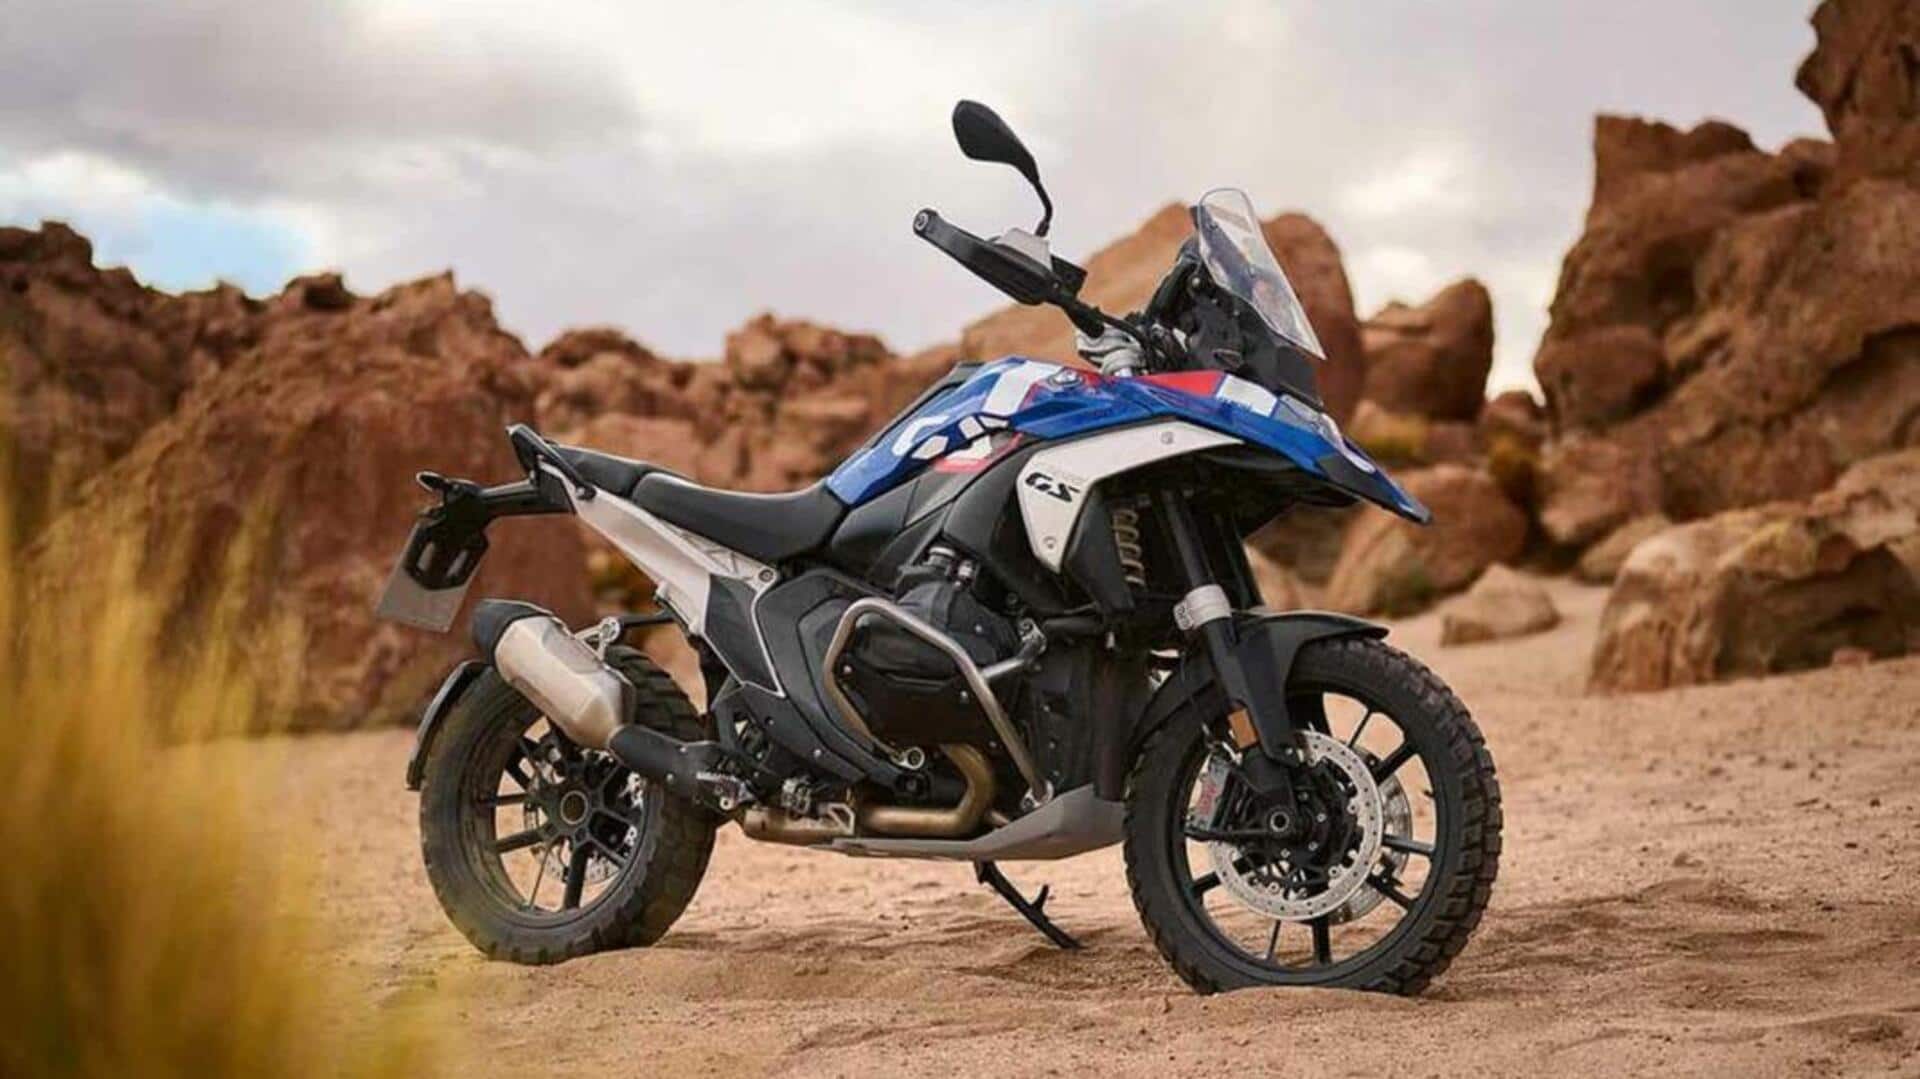 BMW Motorrad launches R 1300 GS in India at ₹21L